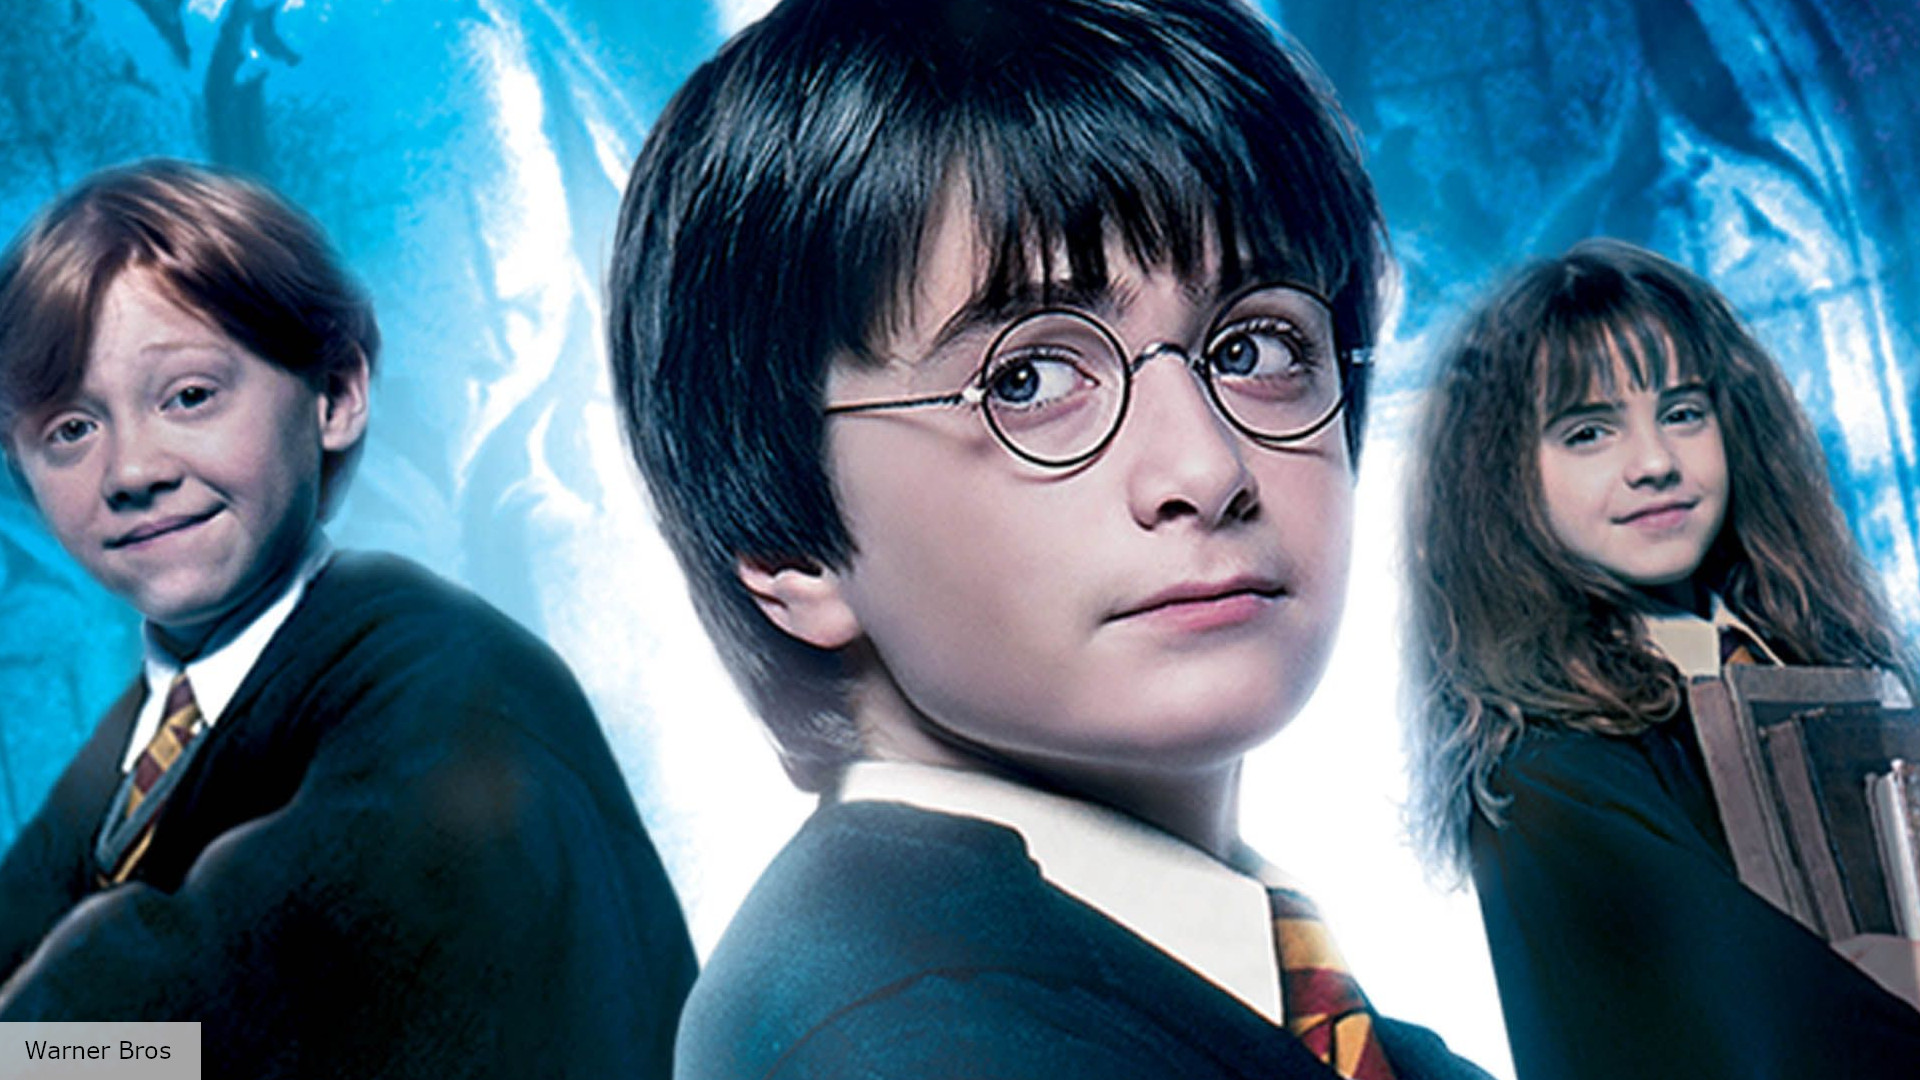 Harry Potter TV series release date speculation, cast, and more news